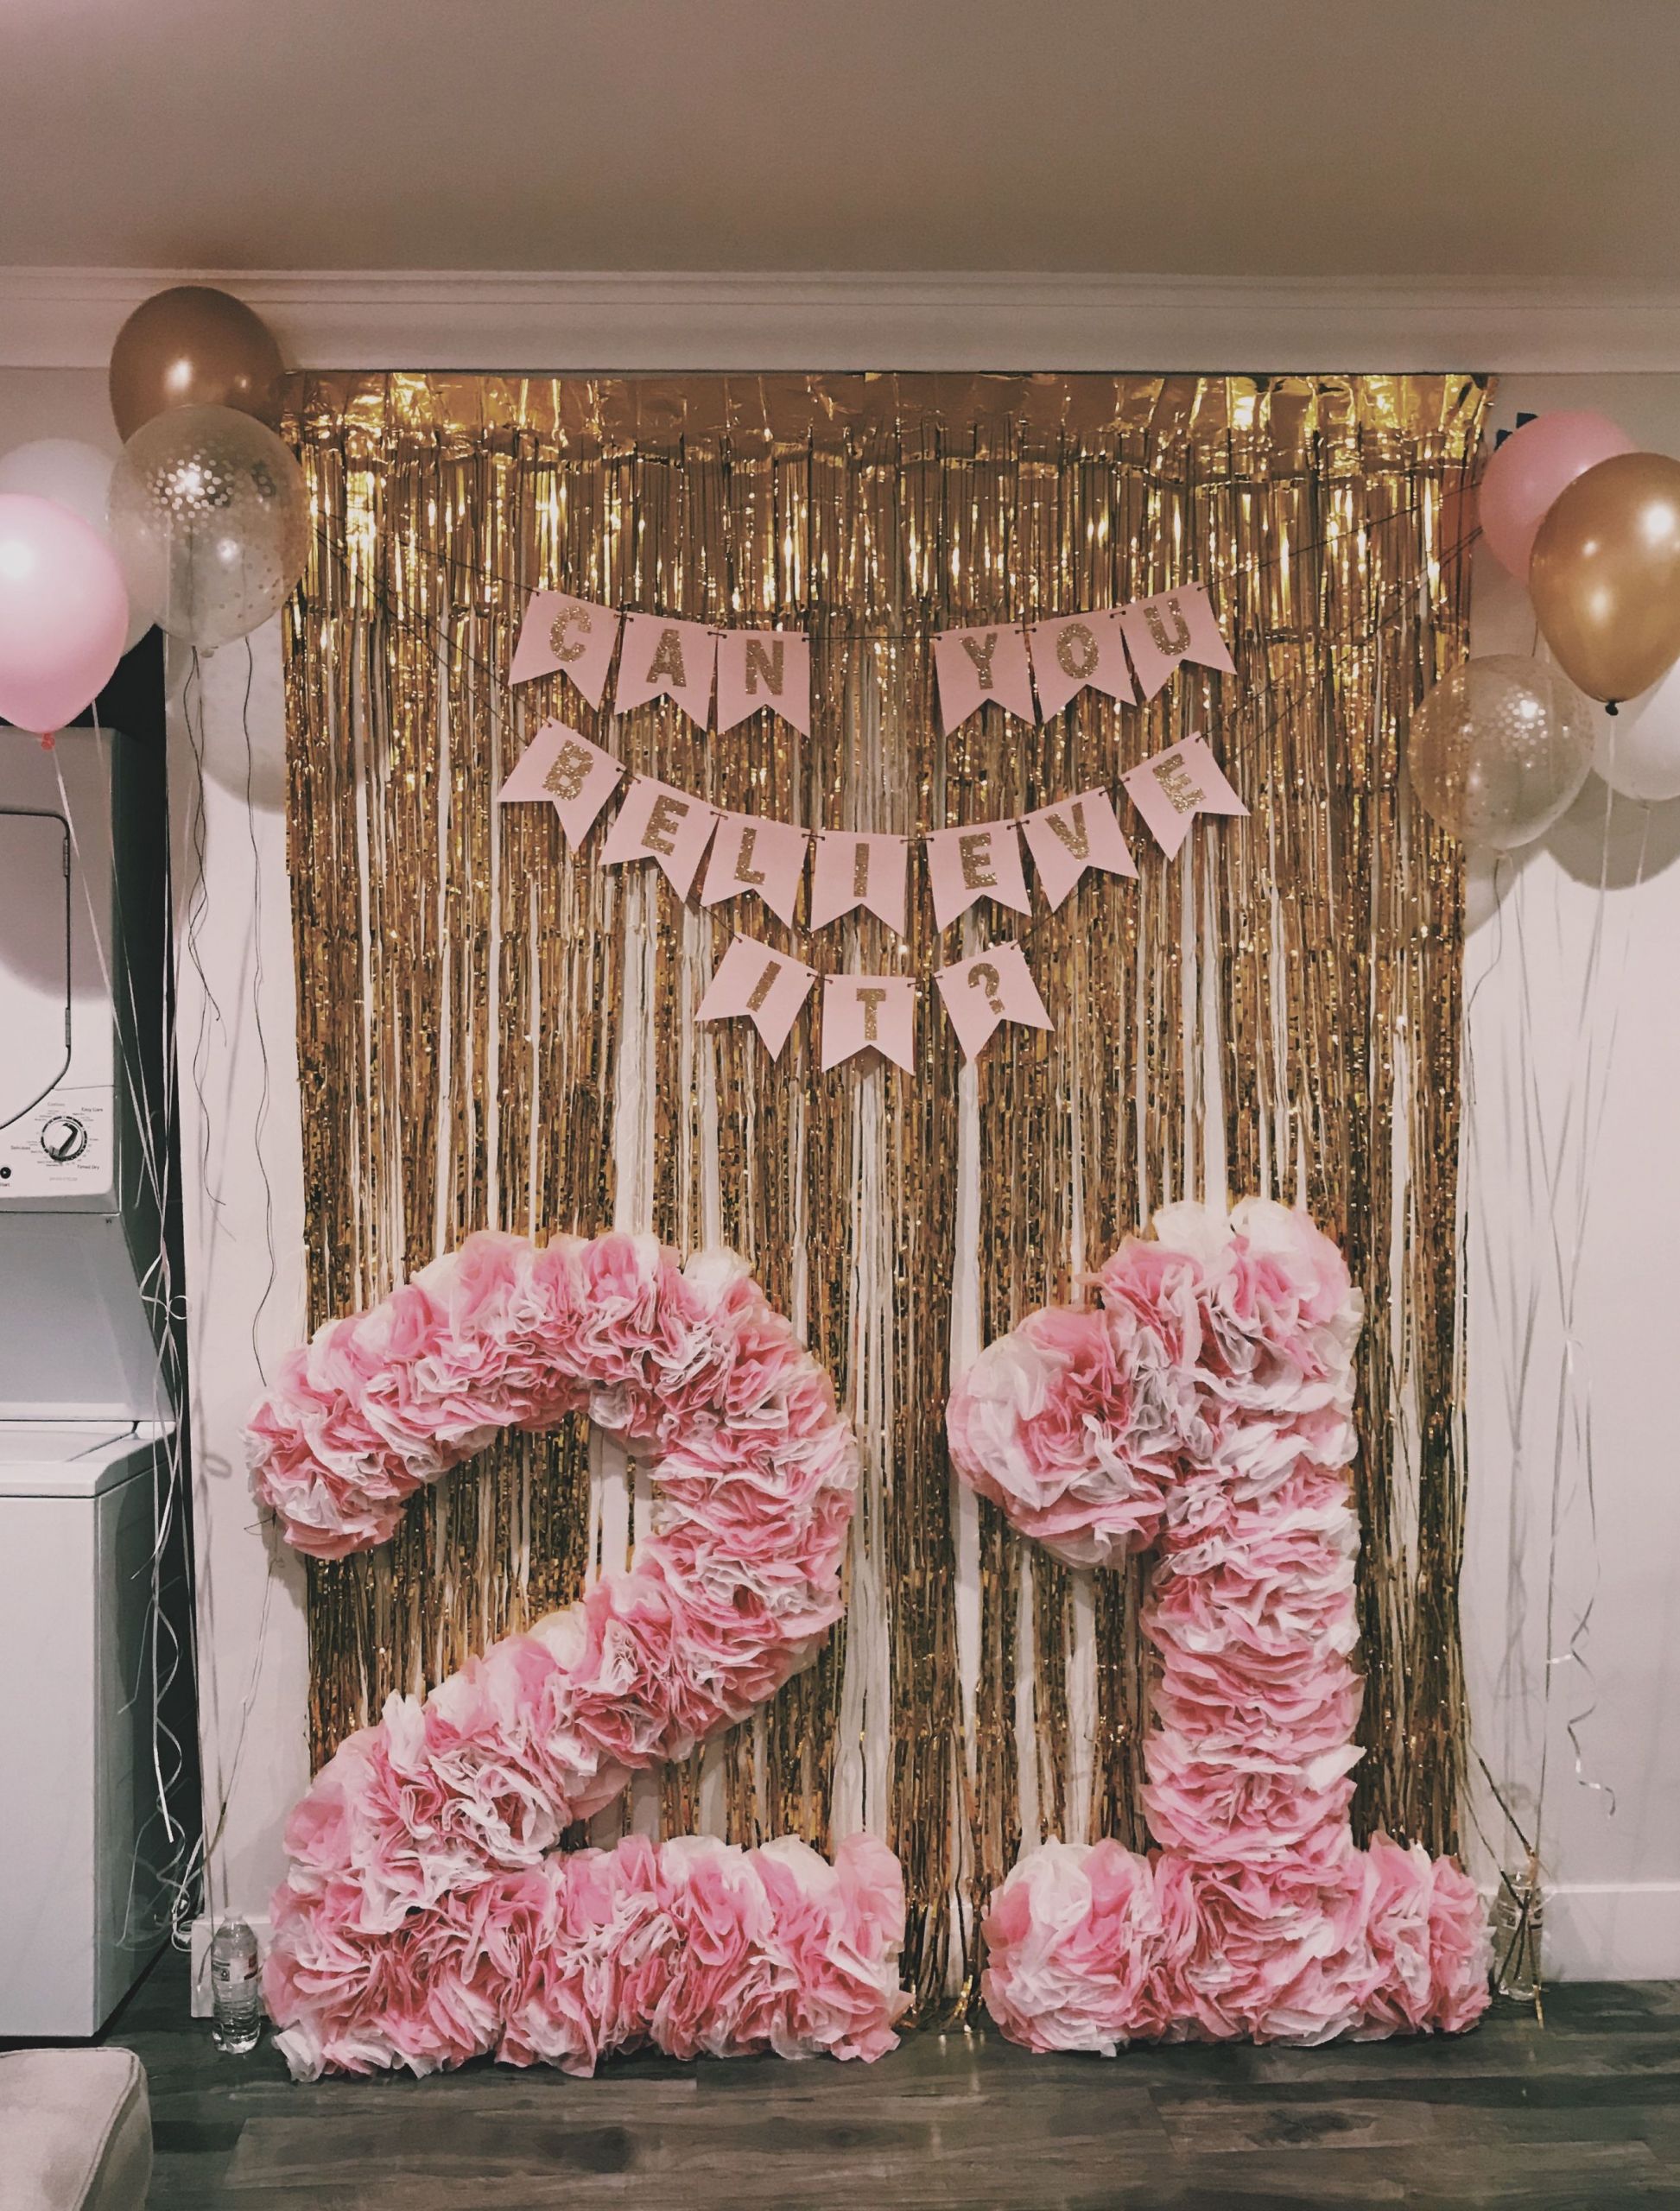 Birthday Party Decorations Diy
 DIY tissue paper numbers White and pink tissue hot glued